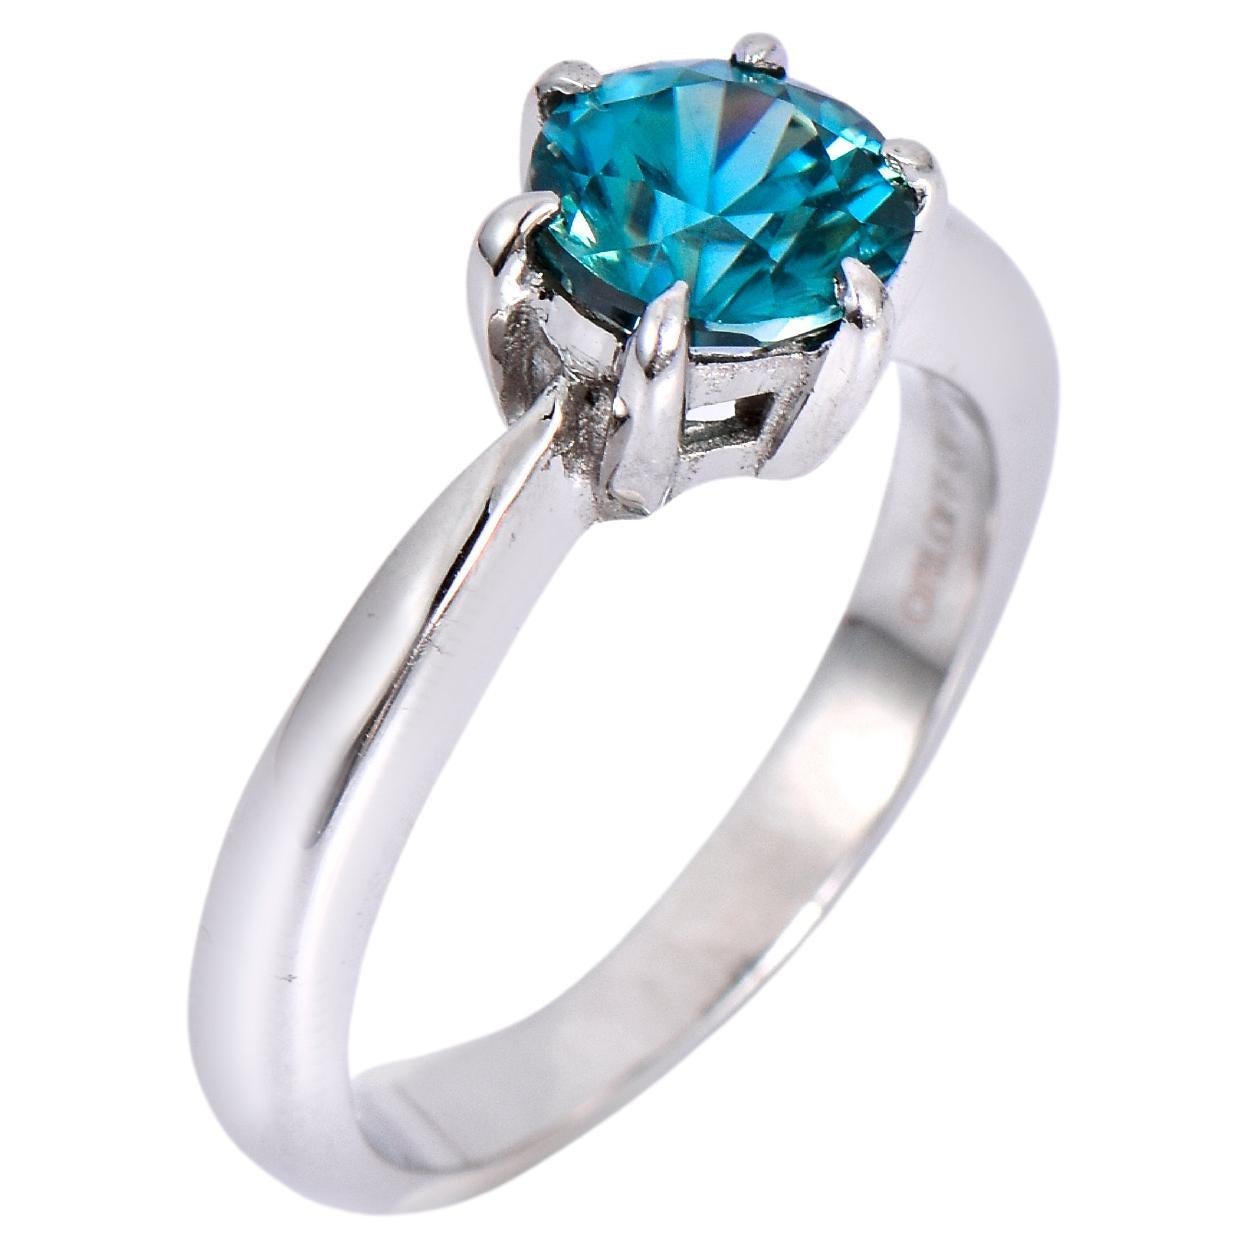 Orloff of Denmark, 1.46 ct Natural Blue Zircon Ring in 925 Sterling Silver For Sale